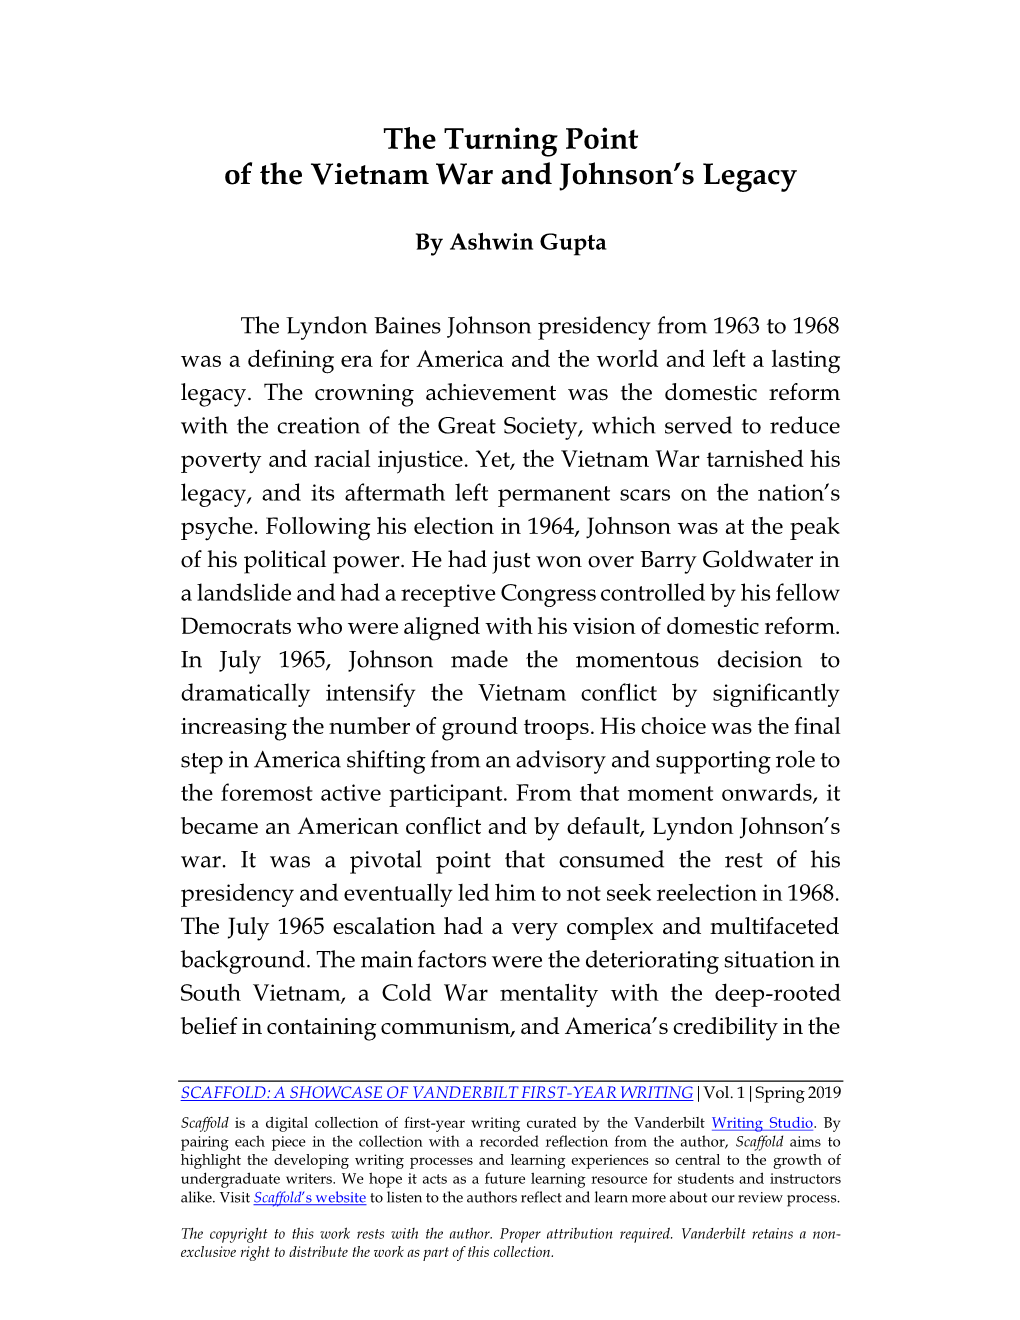 The Turning Point of the Vietnam War and Johnson's Legacy